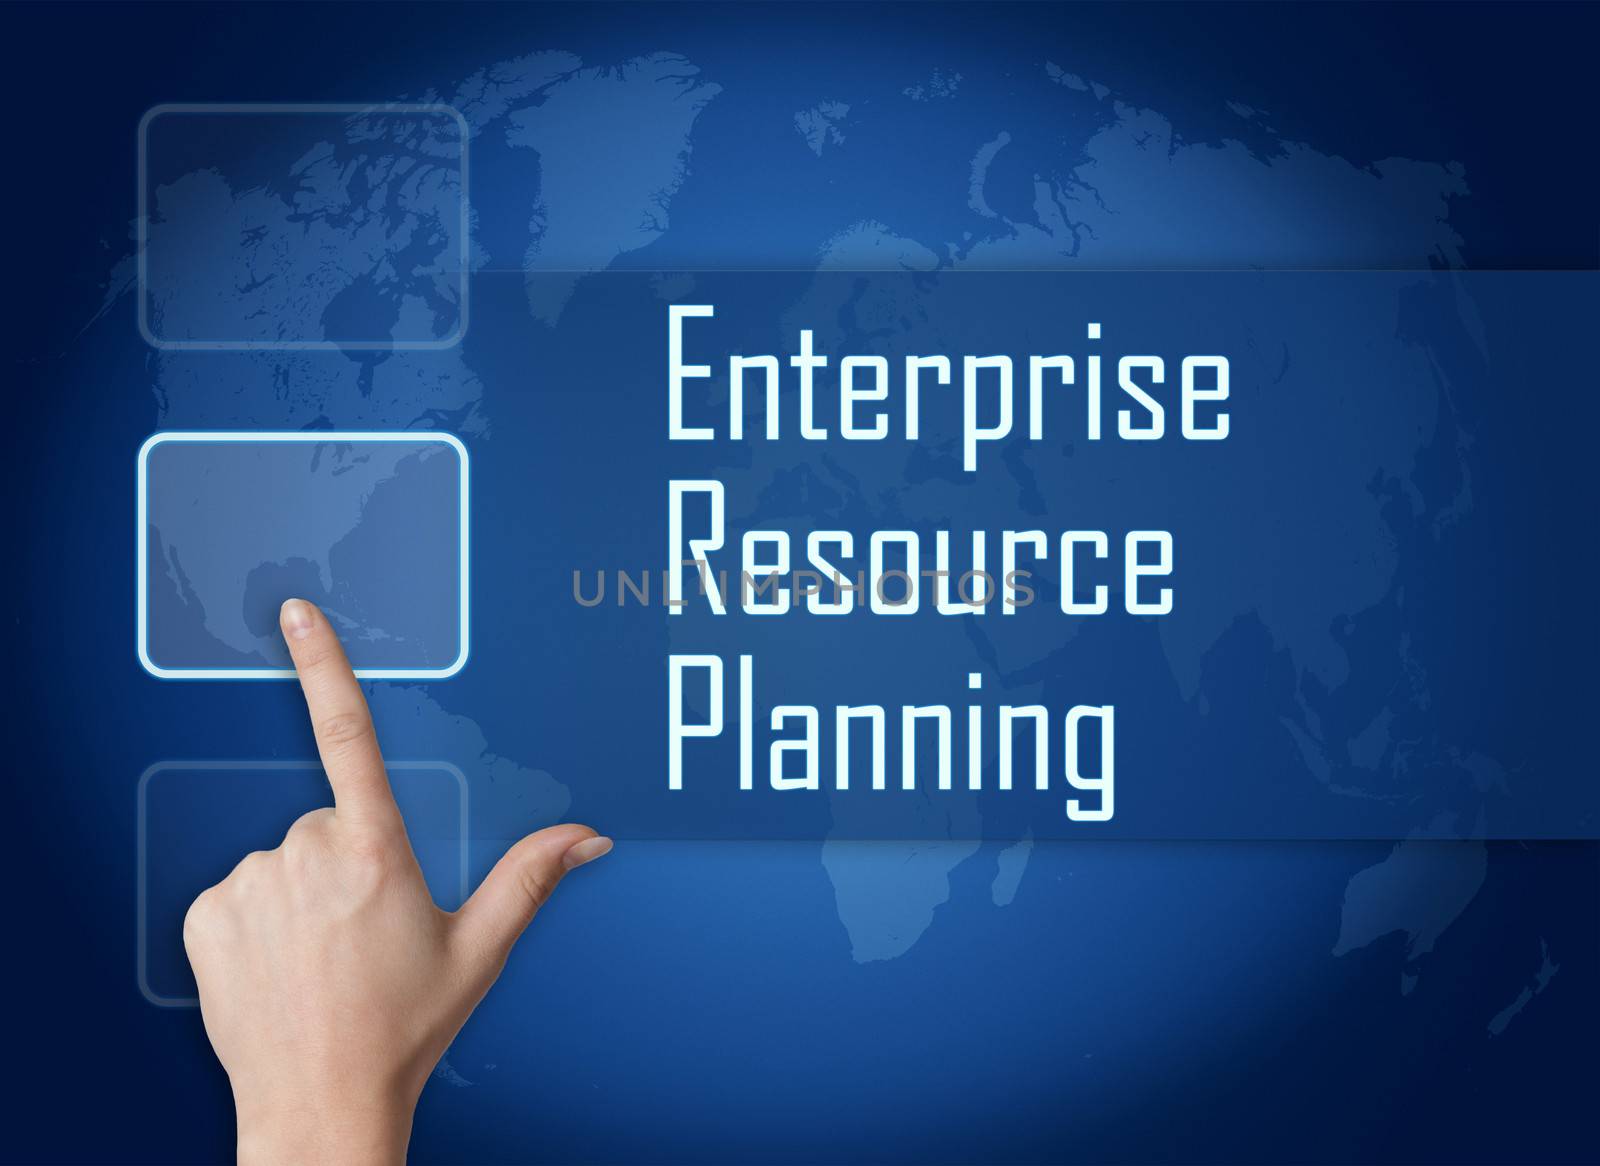 Enterprise Resource Planning concept with interface and world map on blue background